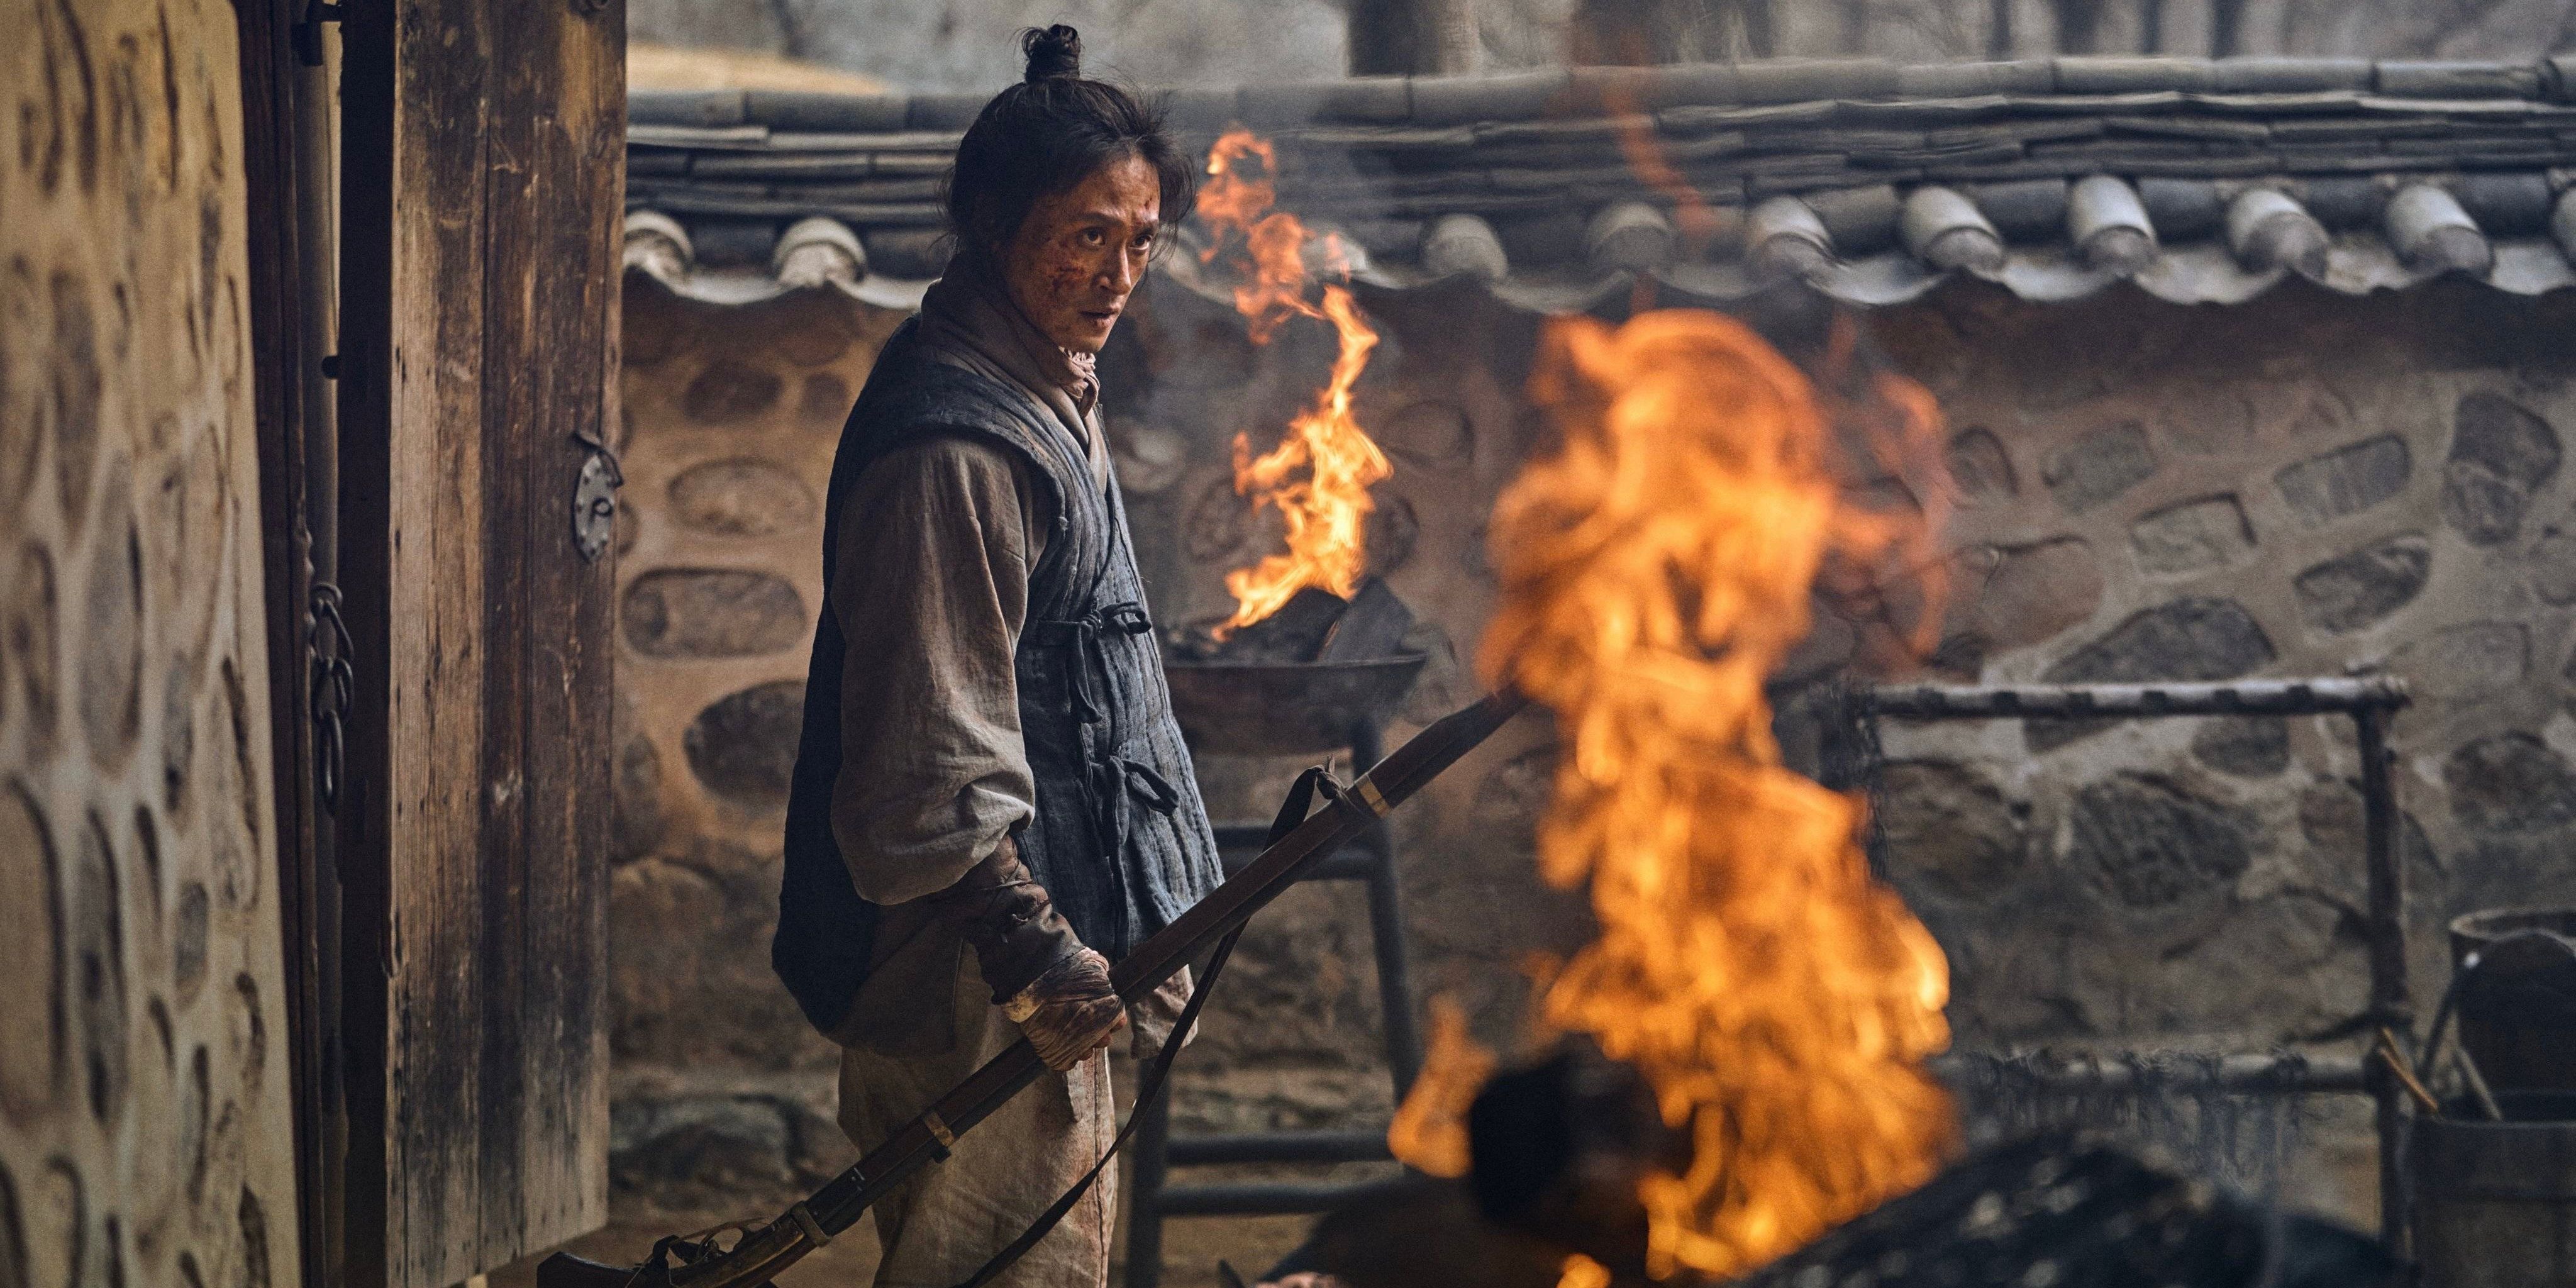 Character Yeong Shin stands within the kingdom's walls amidst the flames